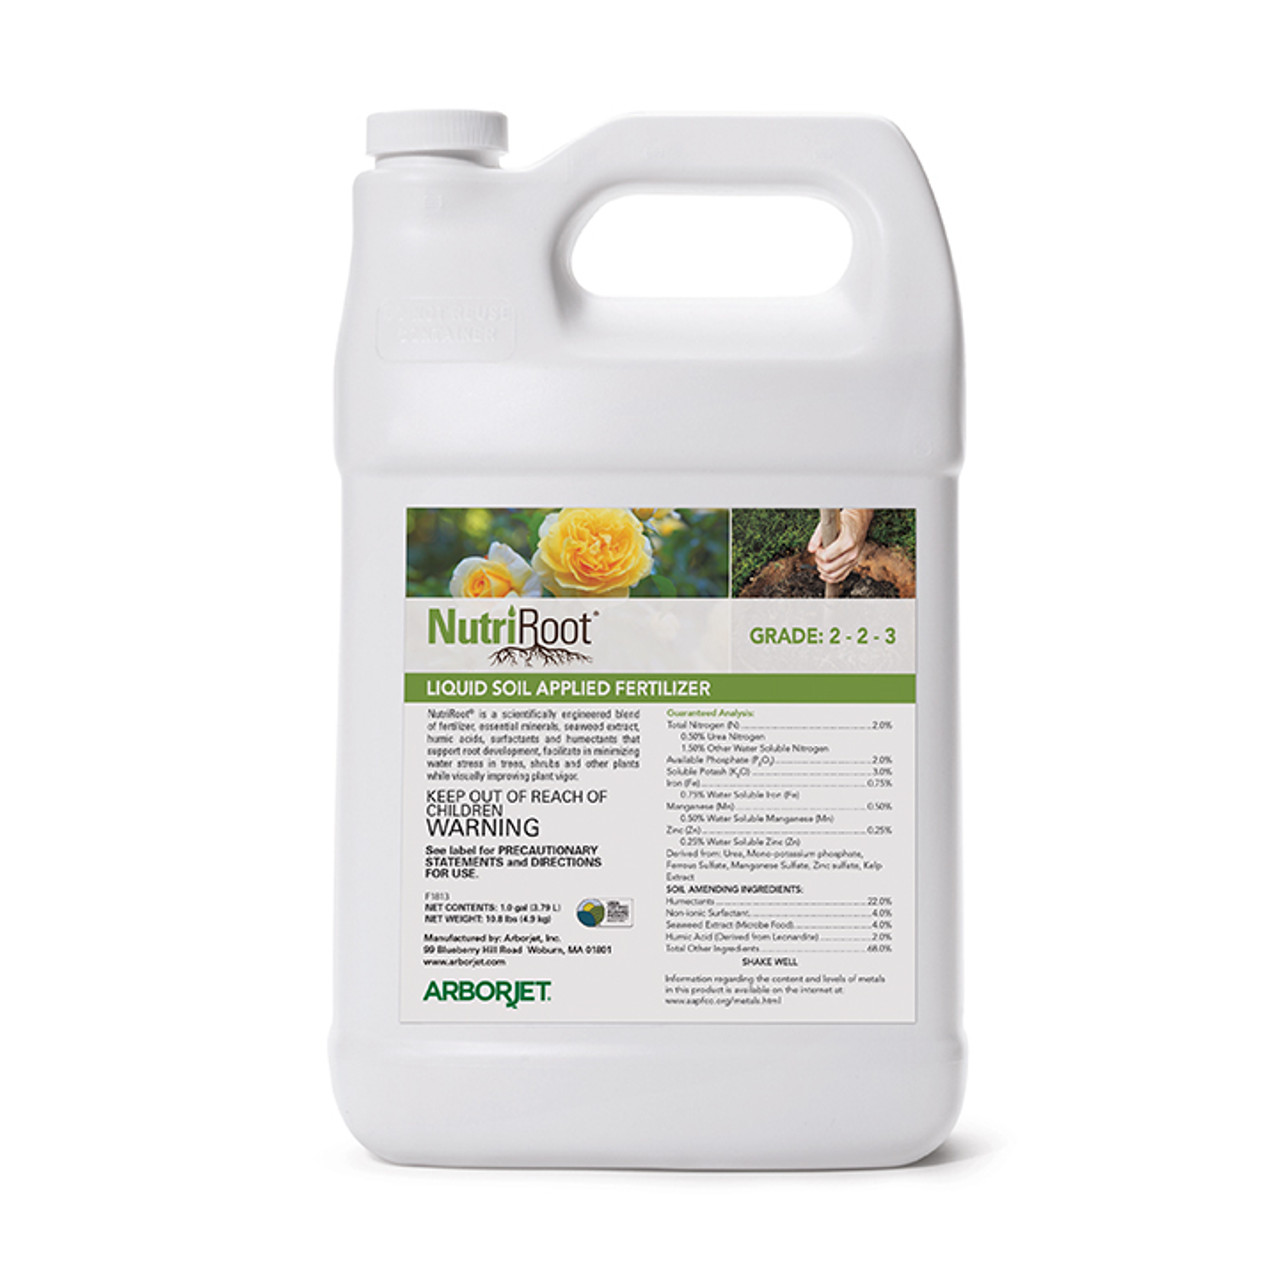 Arborjet NutriRoot 1 GAL fertilizer for plant health care PHC tree care supply and arborist needs.